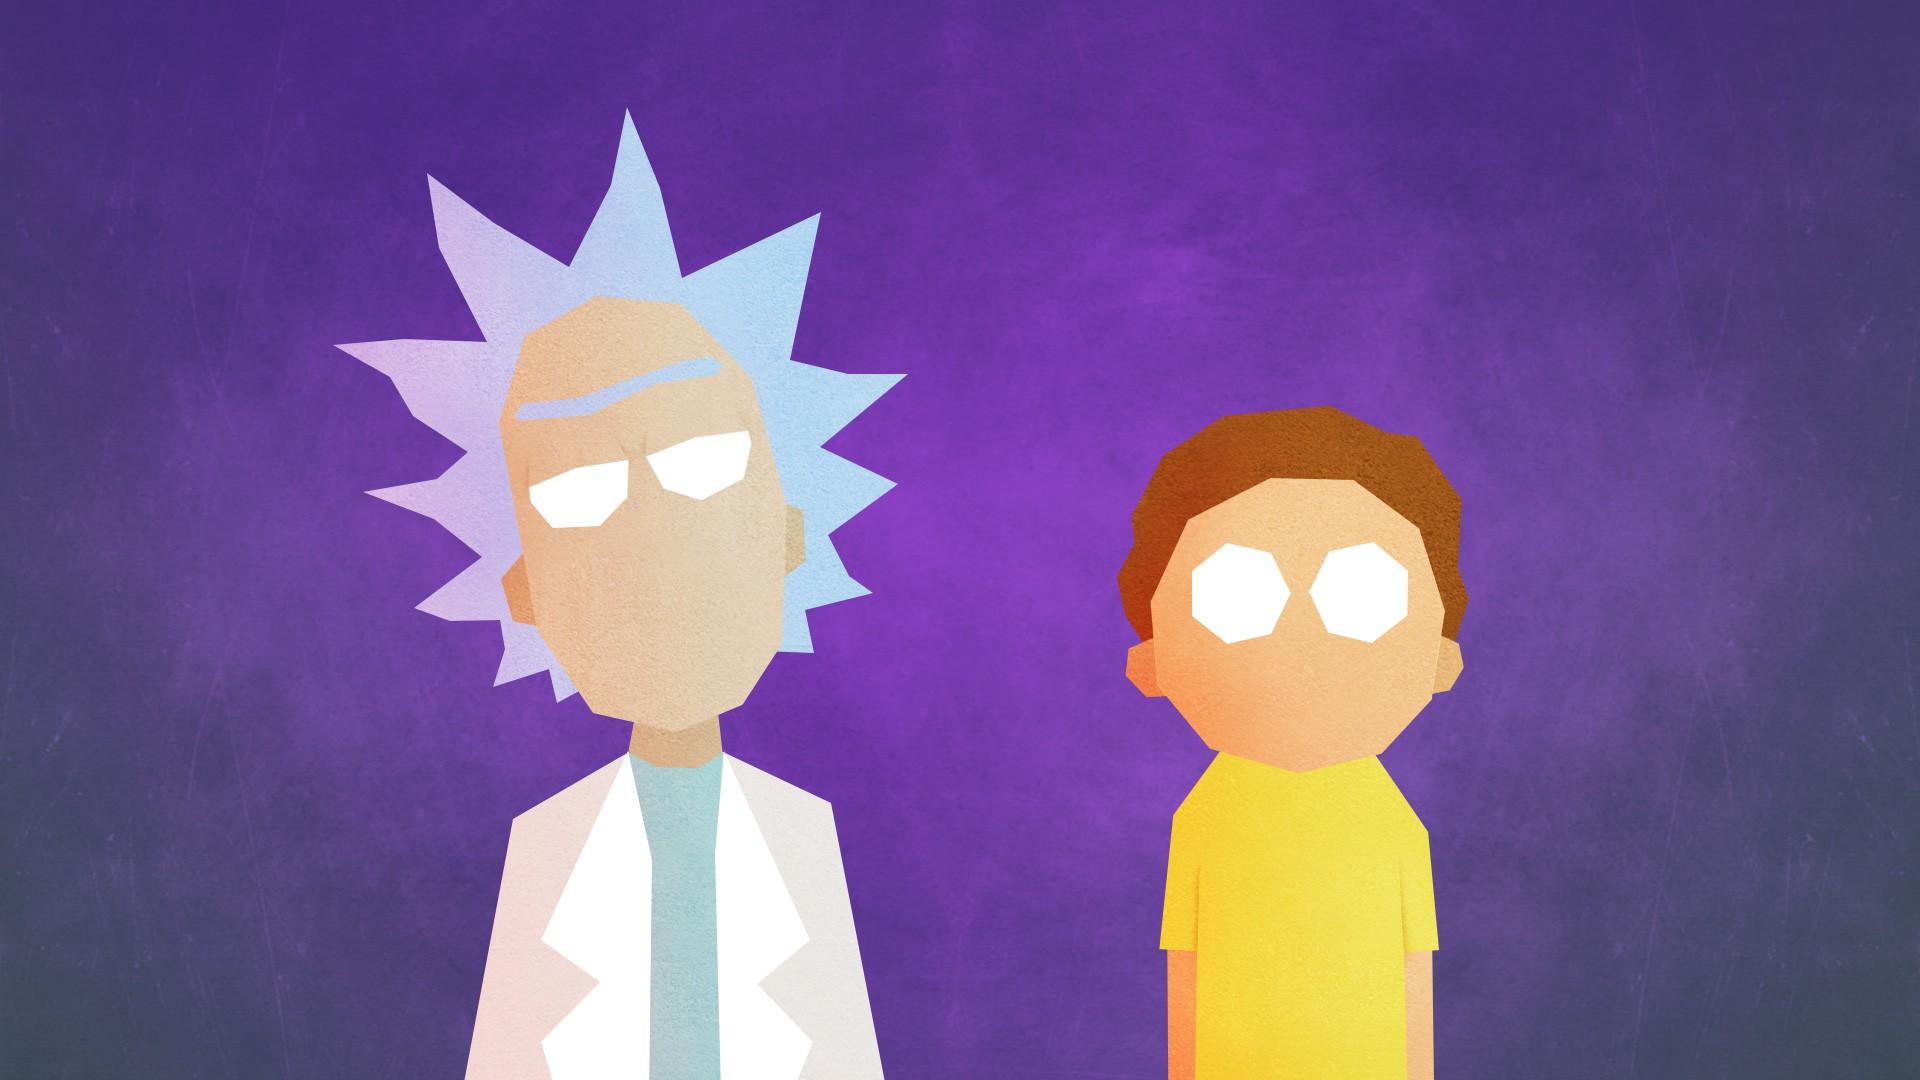 Rick and Morty For Desktop Wallpaper Movie Poster